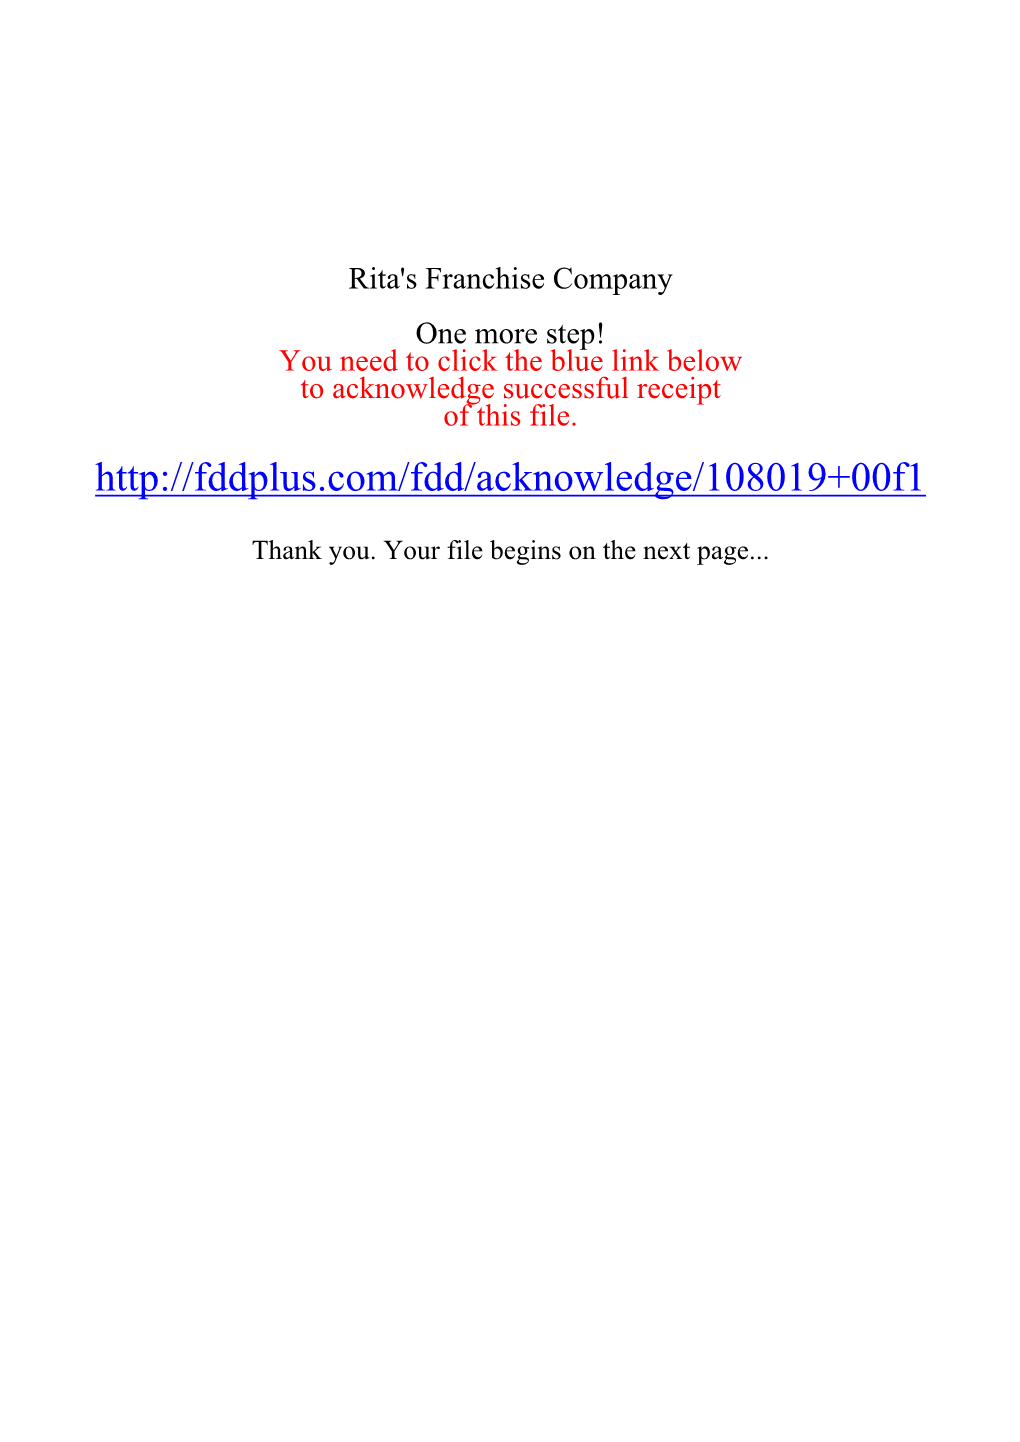 Rita's Franchise Company One More Step! You Need to Click the Blue Link Below to Acknowledge Successful Receipt of This File